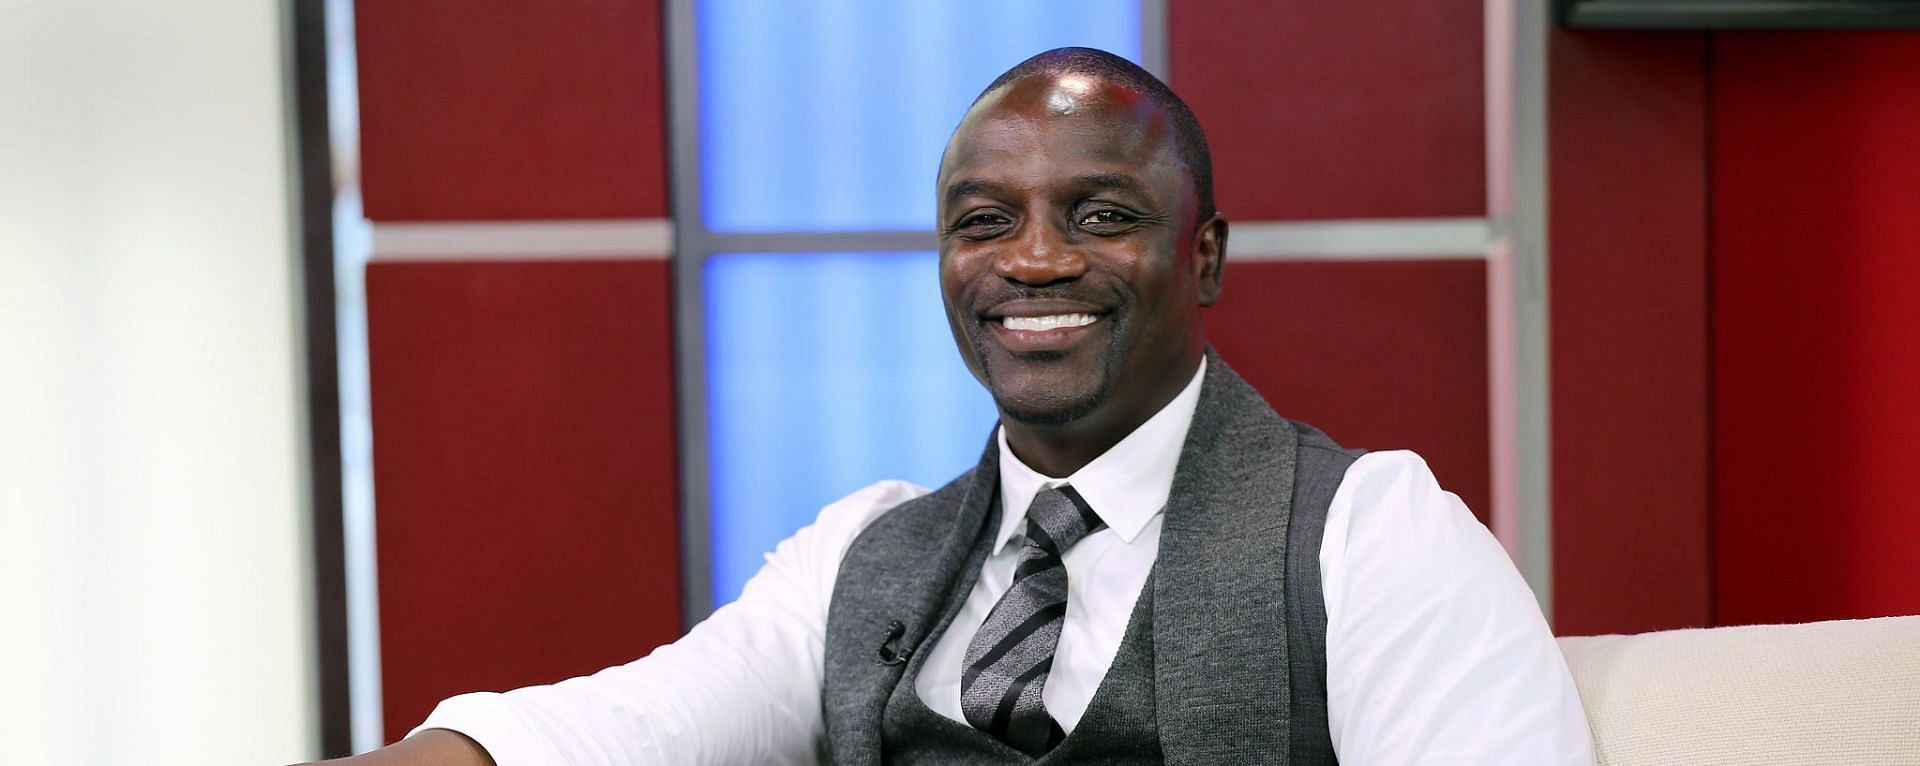 Netizens slammed Akon over defending Kanye West&#039;s anti-Semitic comments (Image via Getty Images)